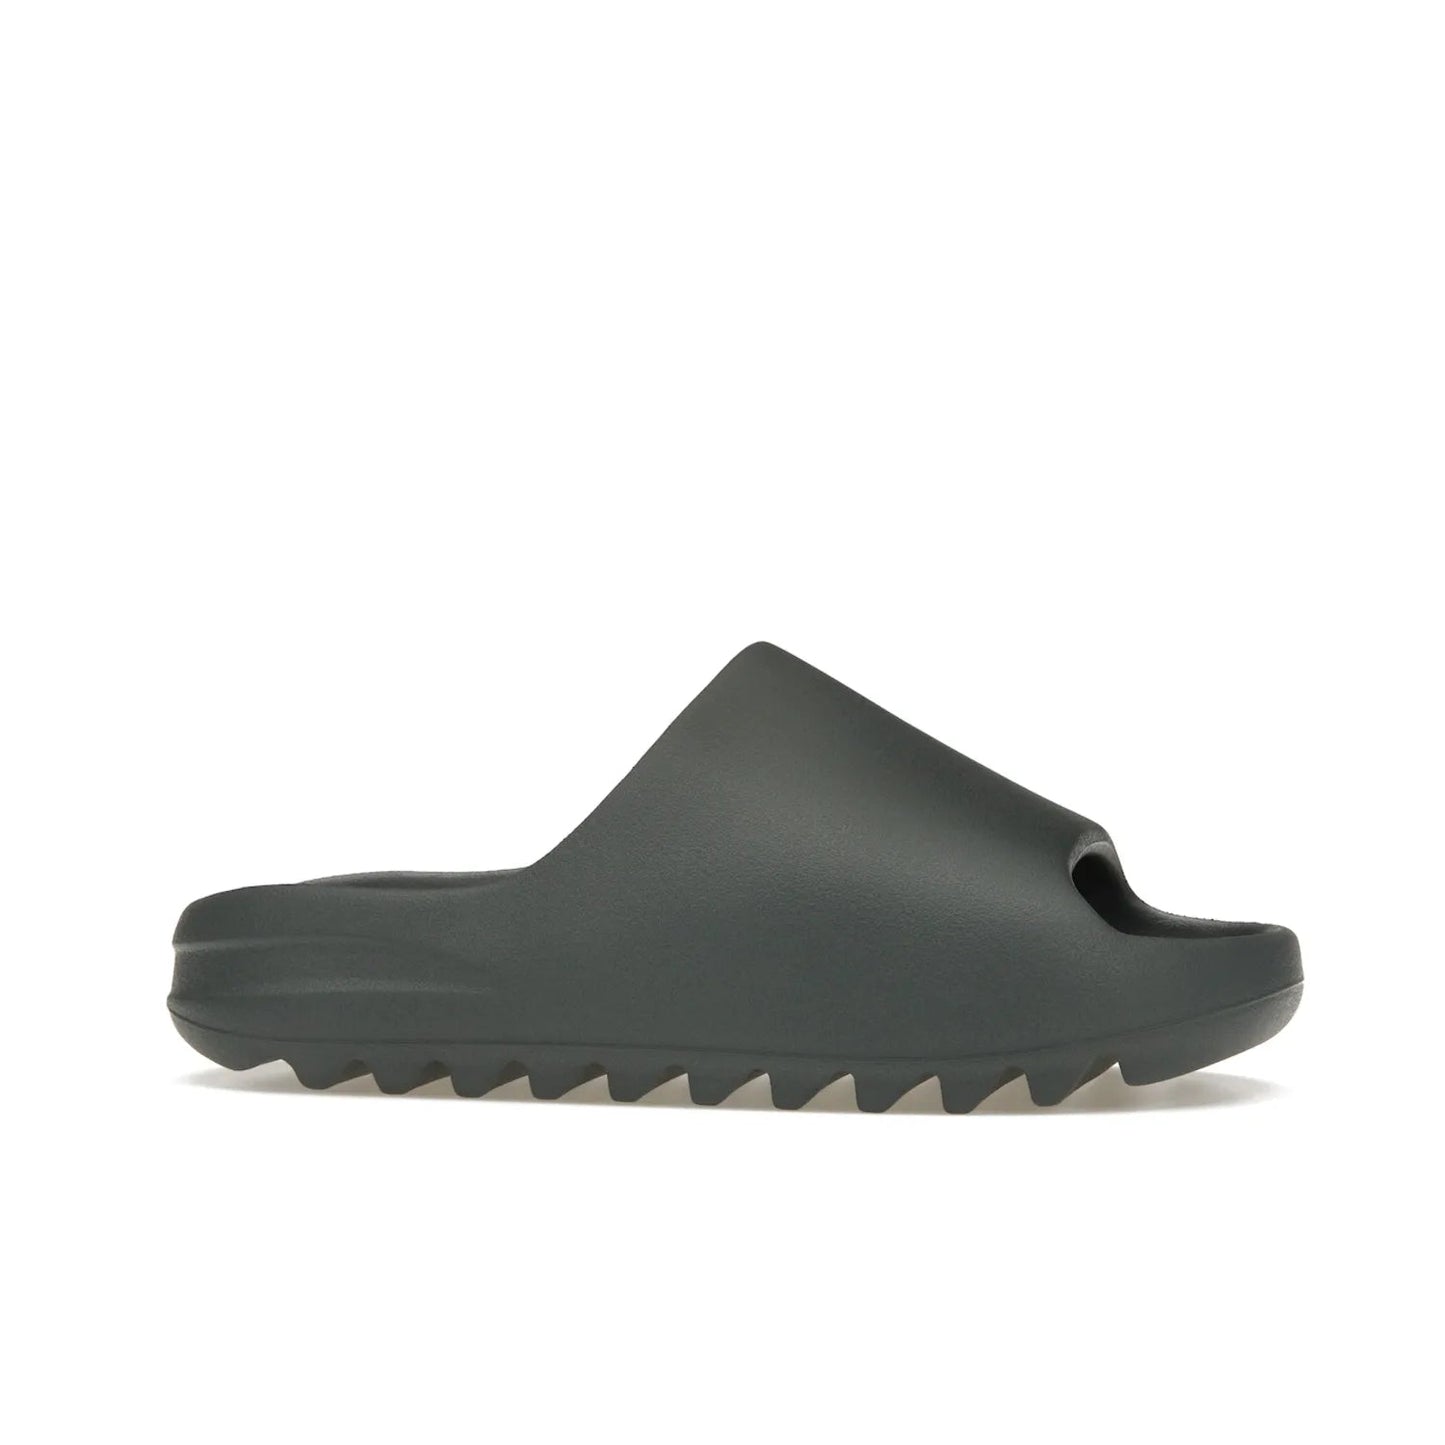 adidas Yeezy Slide Slate Marine - Image 2 - Only at www.BallersClubKickz.com - Discover the Adidas Yeezy Slide Slate Marine. With a Slate Marine colorway, contrasting outsole, and matching strap, these sandals make a timeless fashion statement. Out August 11th, 2023.